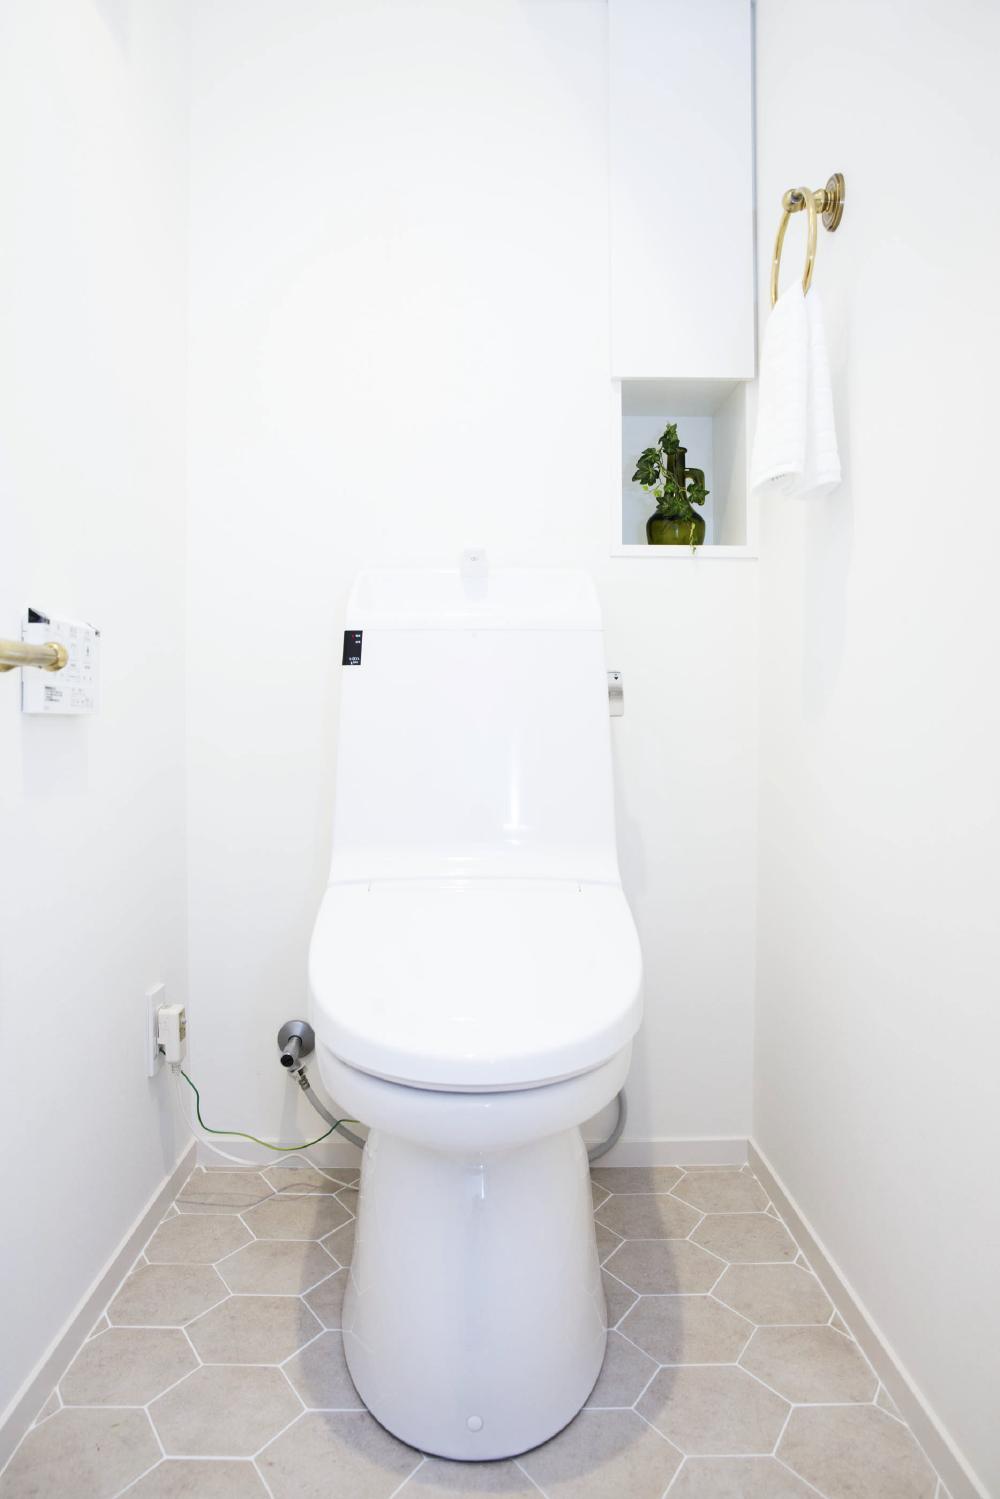 Other Equipment. Toilet newly established with standard equipment Washlet  ※ Floor material ・ Towel over ・ Paper holder is different from the standard specification.